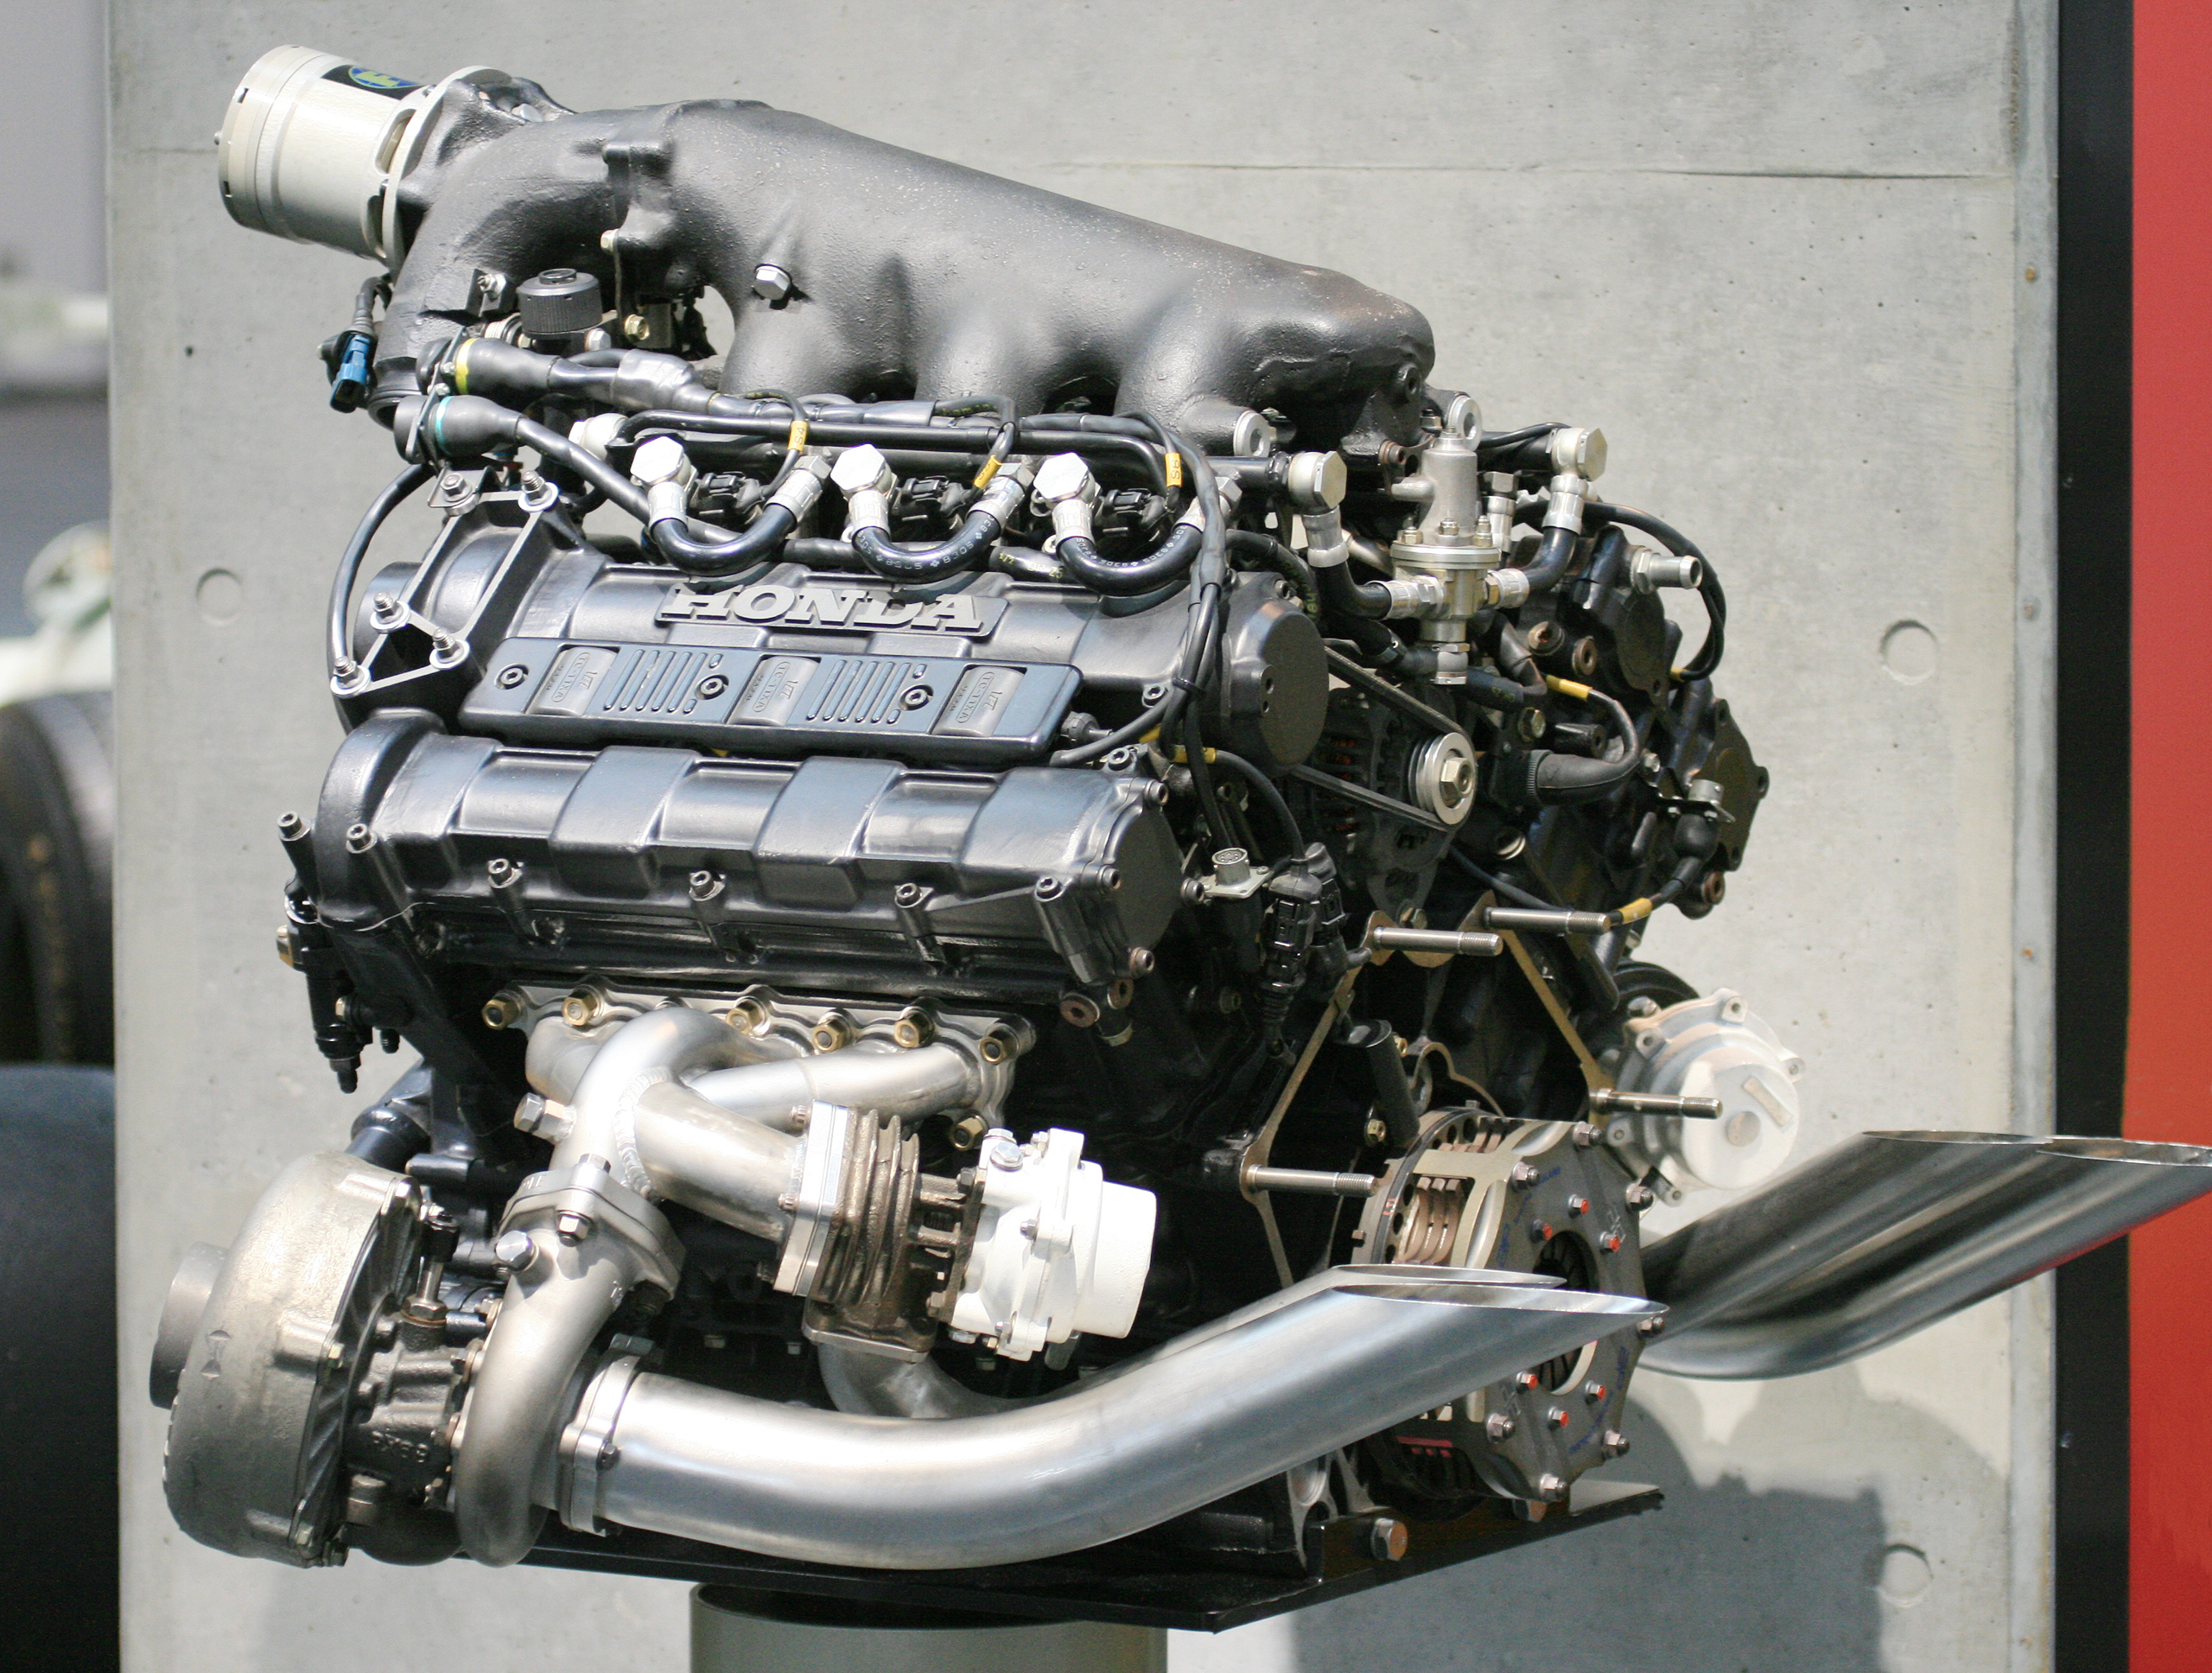 Why is there a Growing Popularity of Turbocharged Car Engines? Here's Why